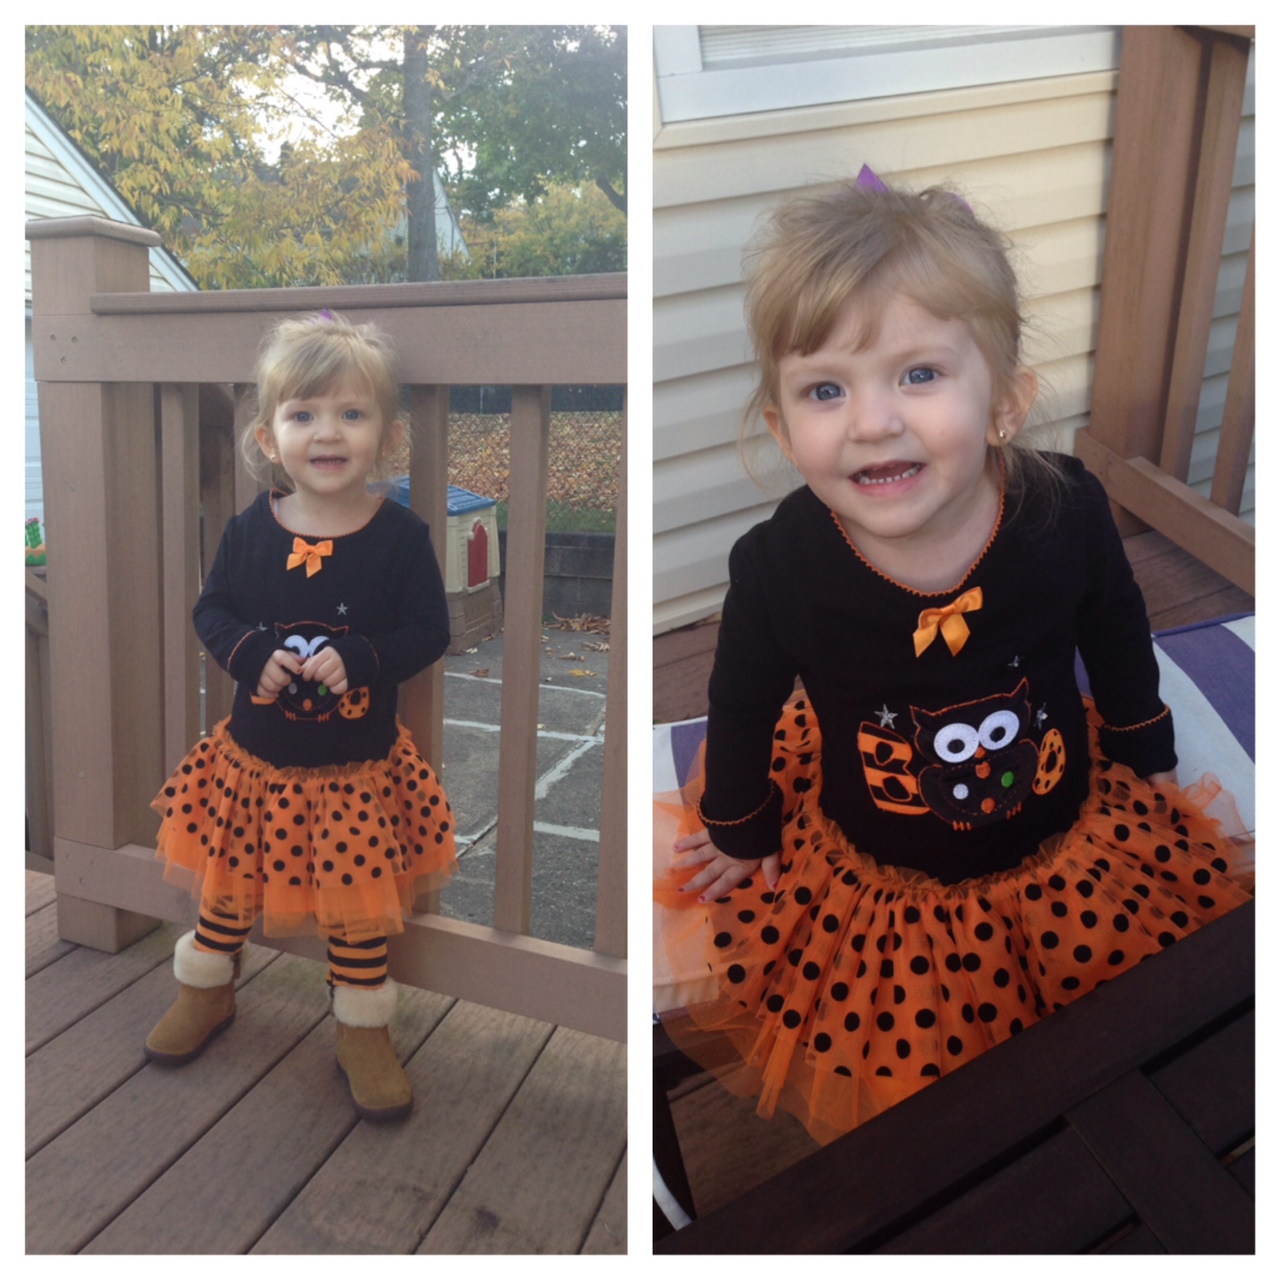 Bonnie Jean's Adorable Halloween Outfit - The Kids Did It